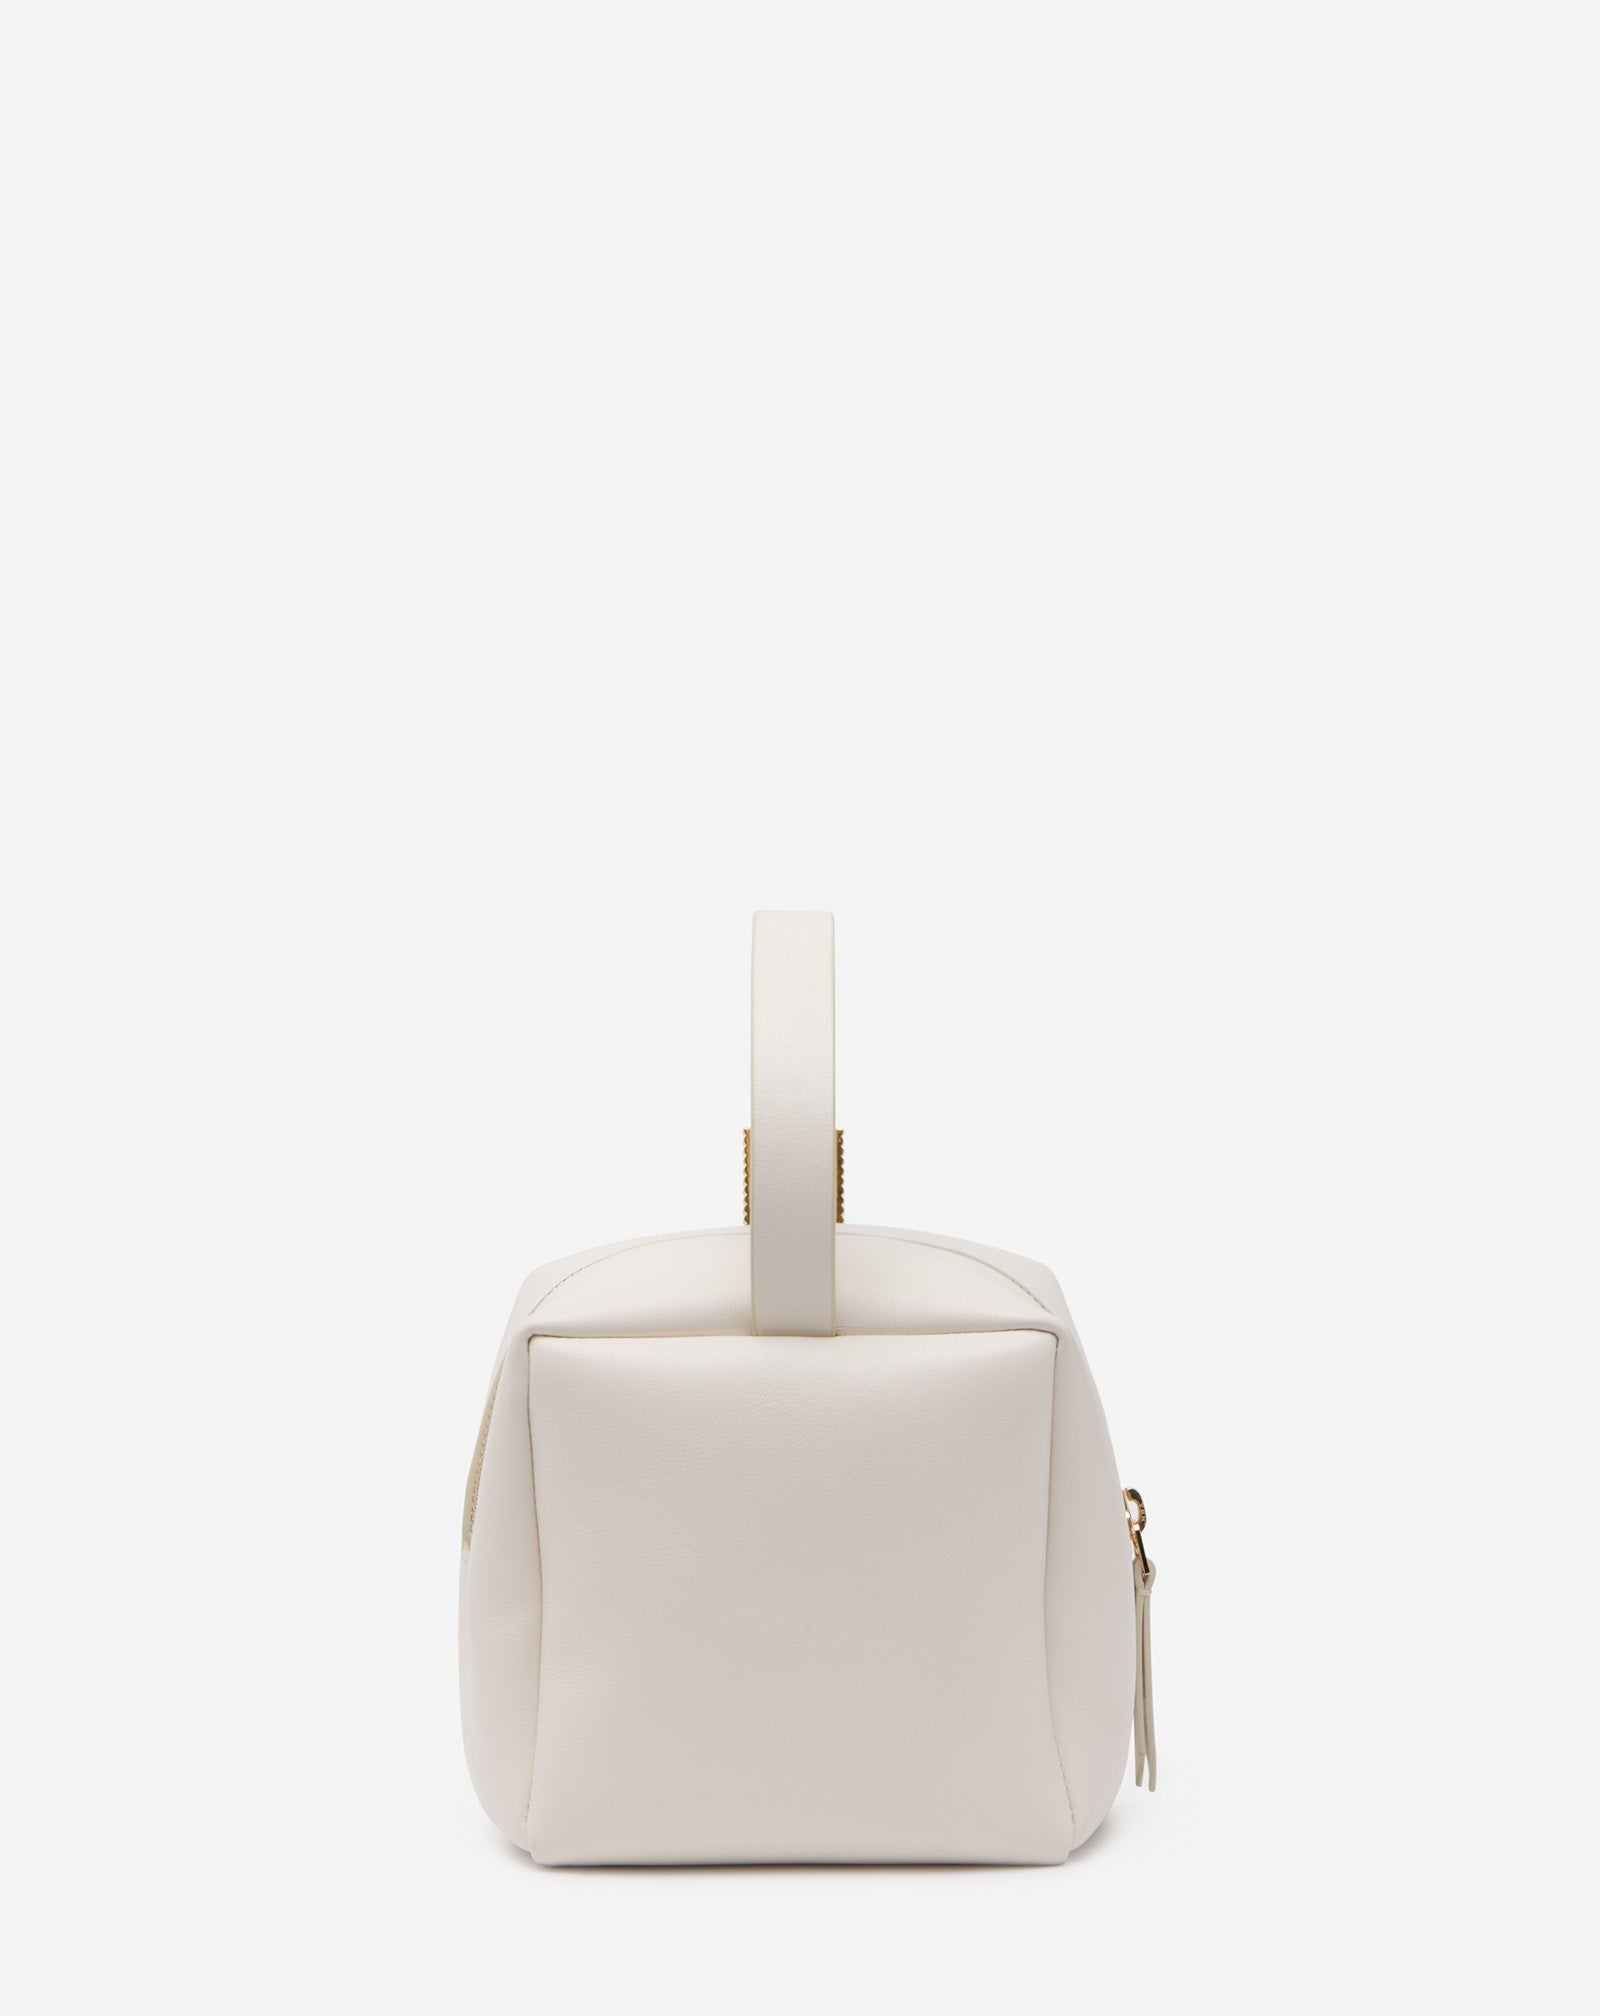 TEMPO BY LANVIN LEATHER BAG - 7